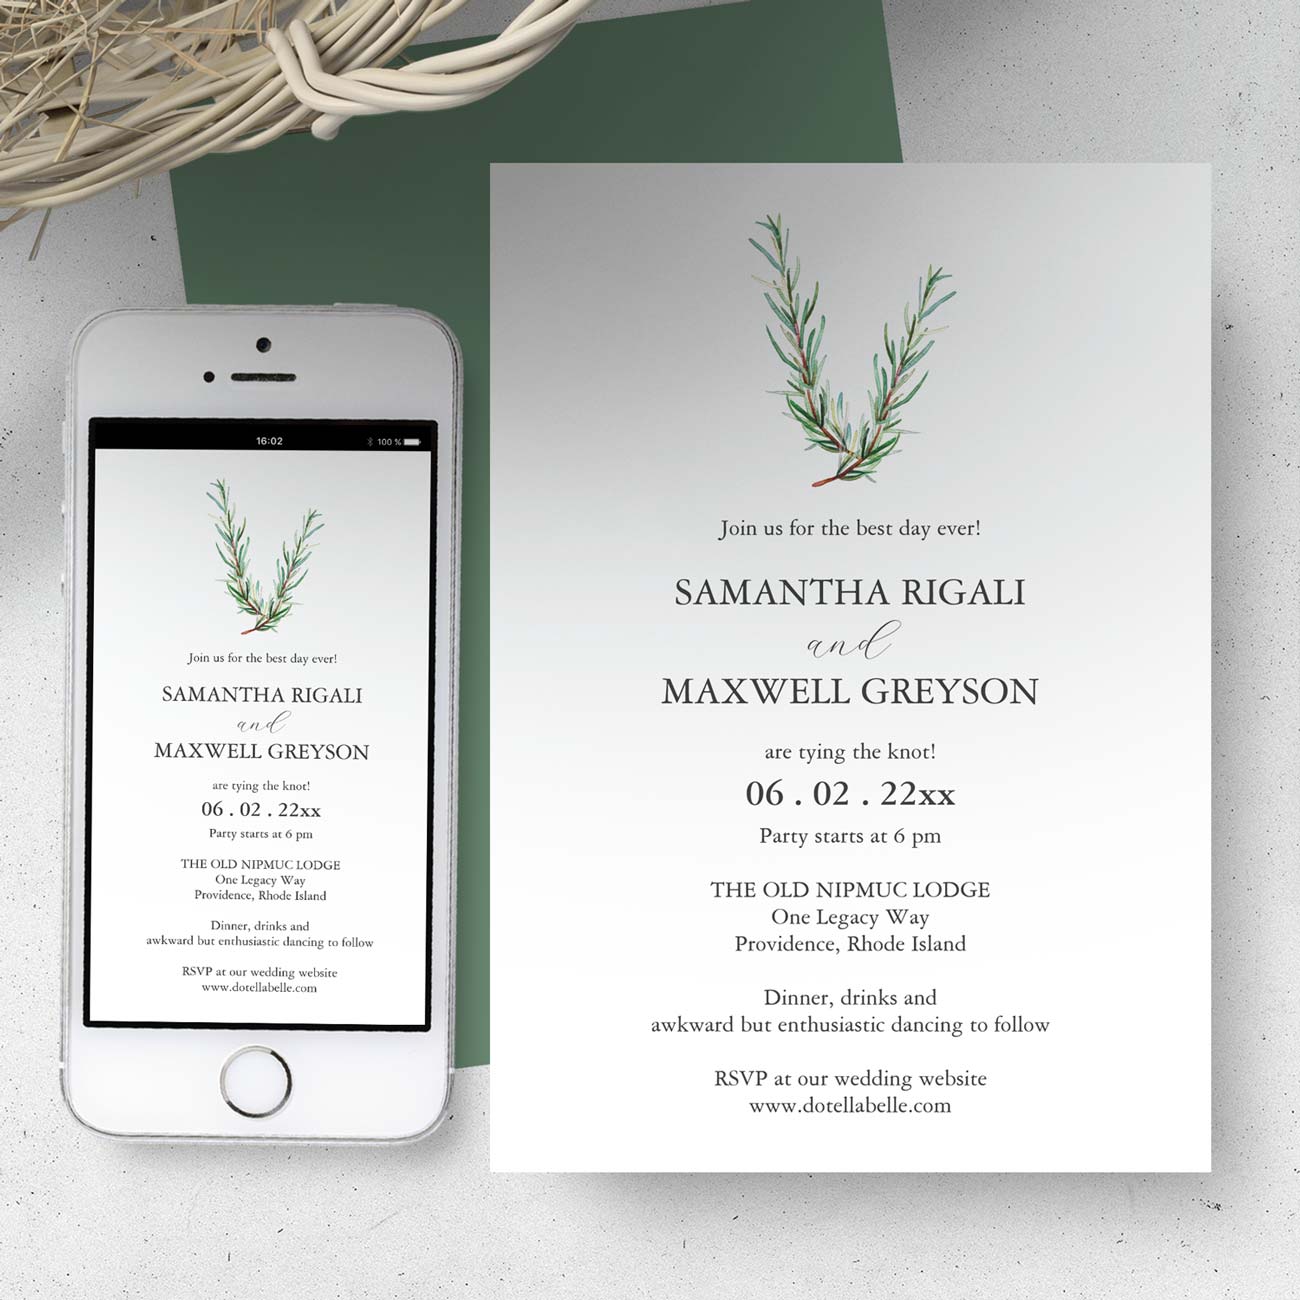 Casual wedding invitation wording features unique watercolor rustic botanical art by Victoria Grigaliunas of Do Tell A Belle